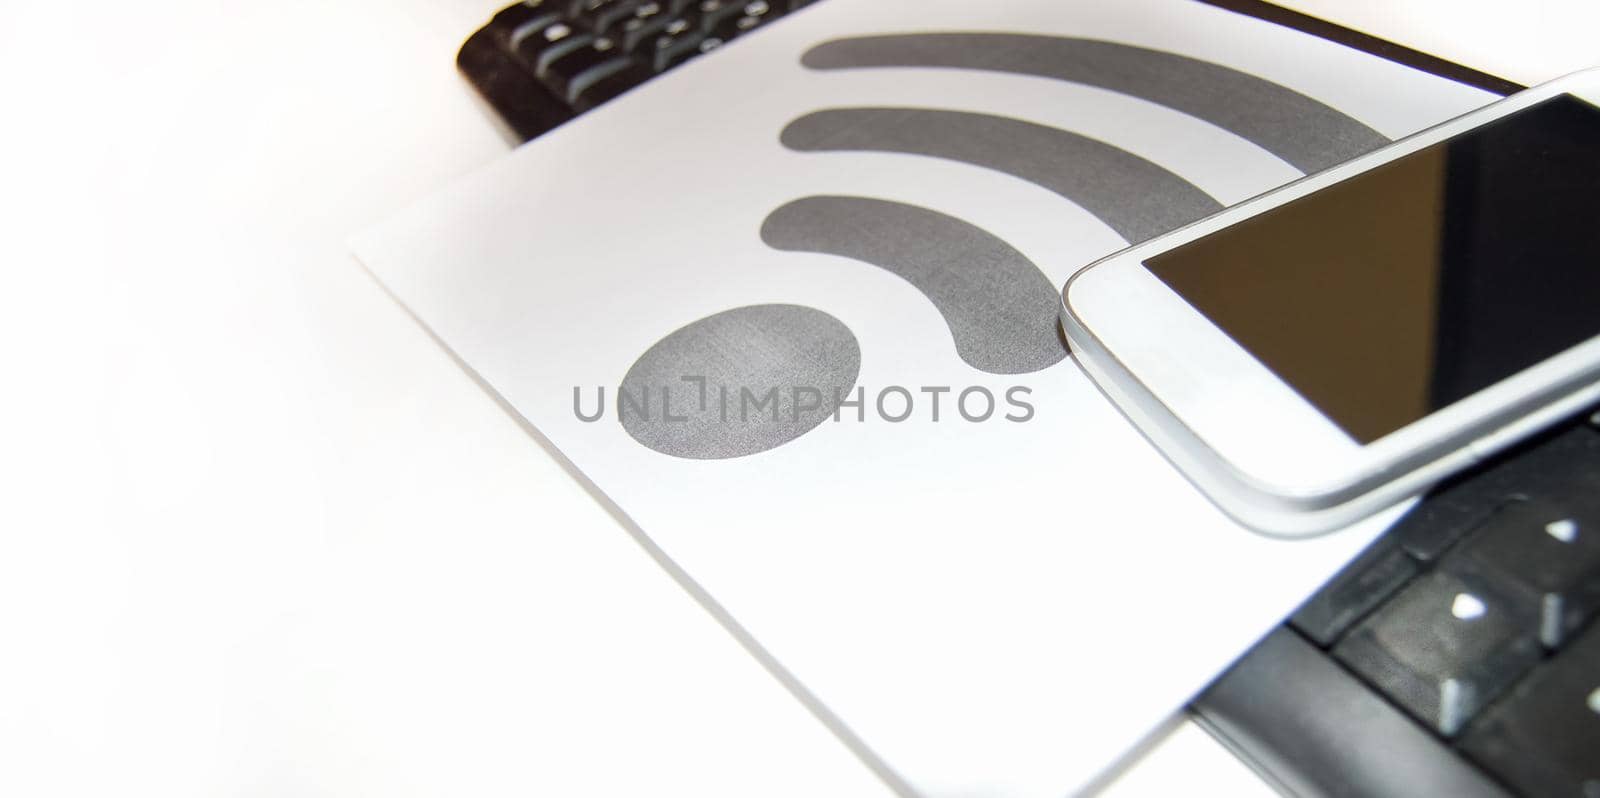 Wi-Fi symbol on a piece of paper near the computer keyboard and mobile phone, wireless Internet, copy space.